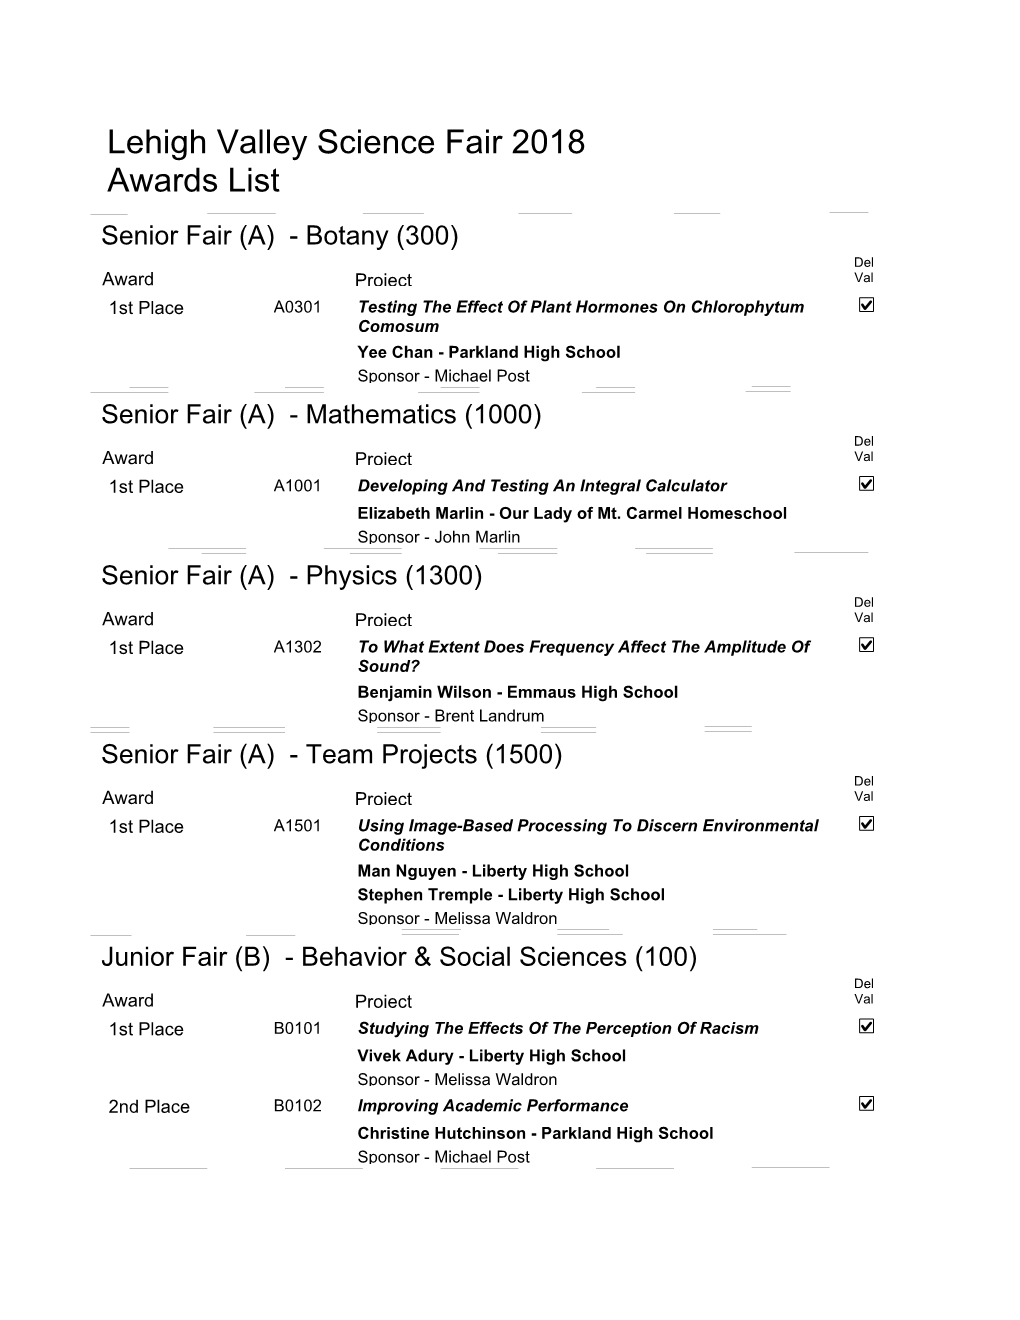 Full Awards List by Category